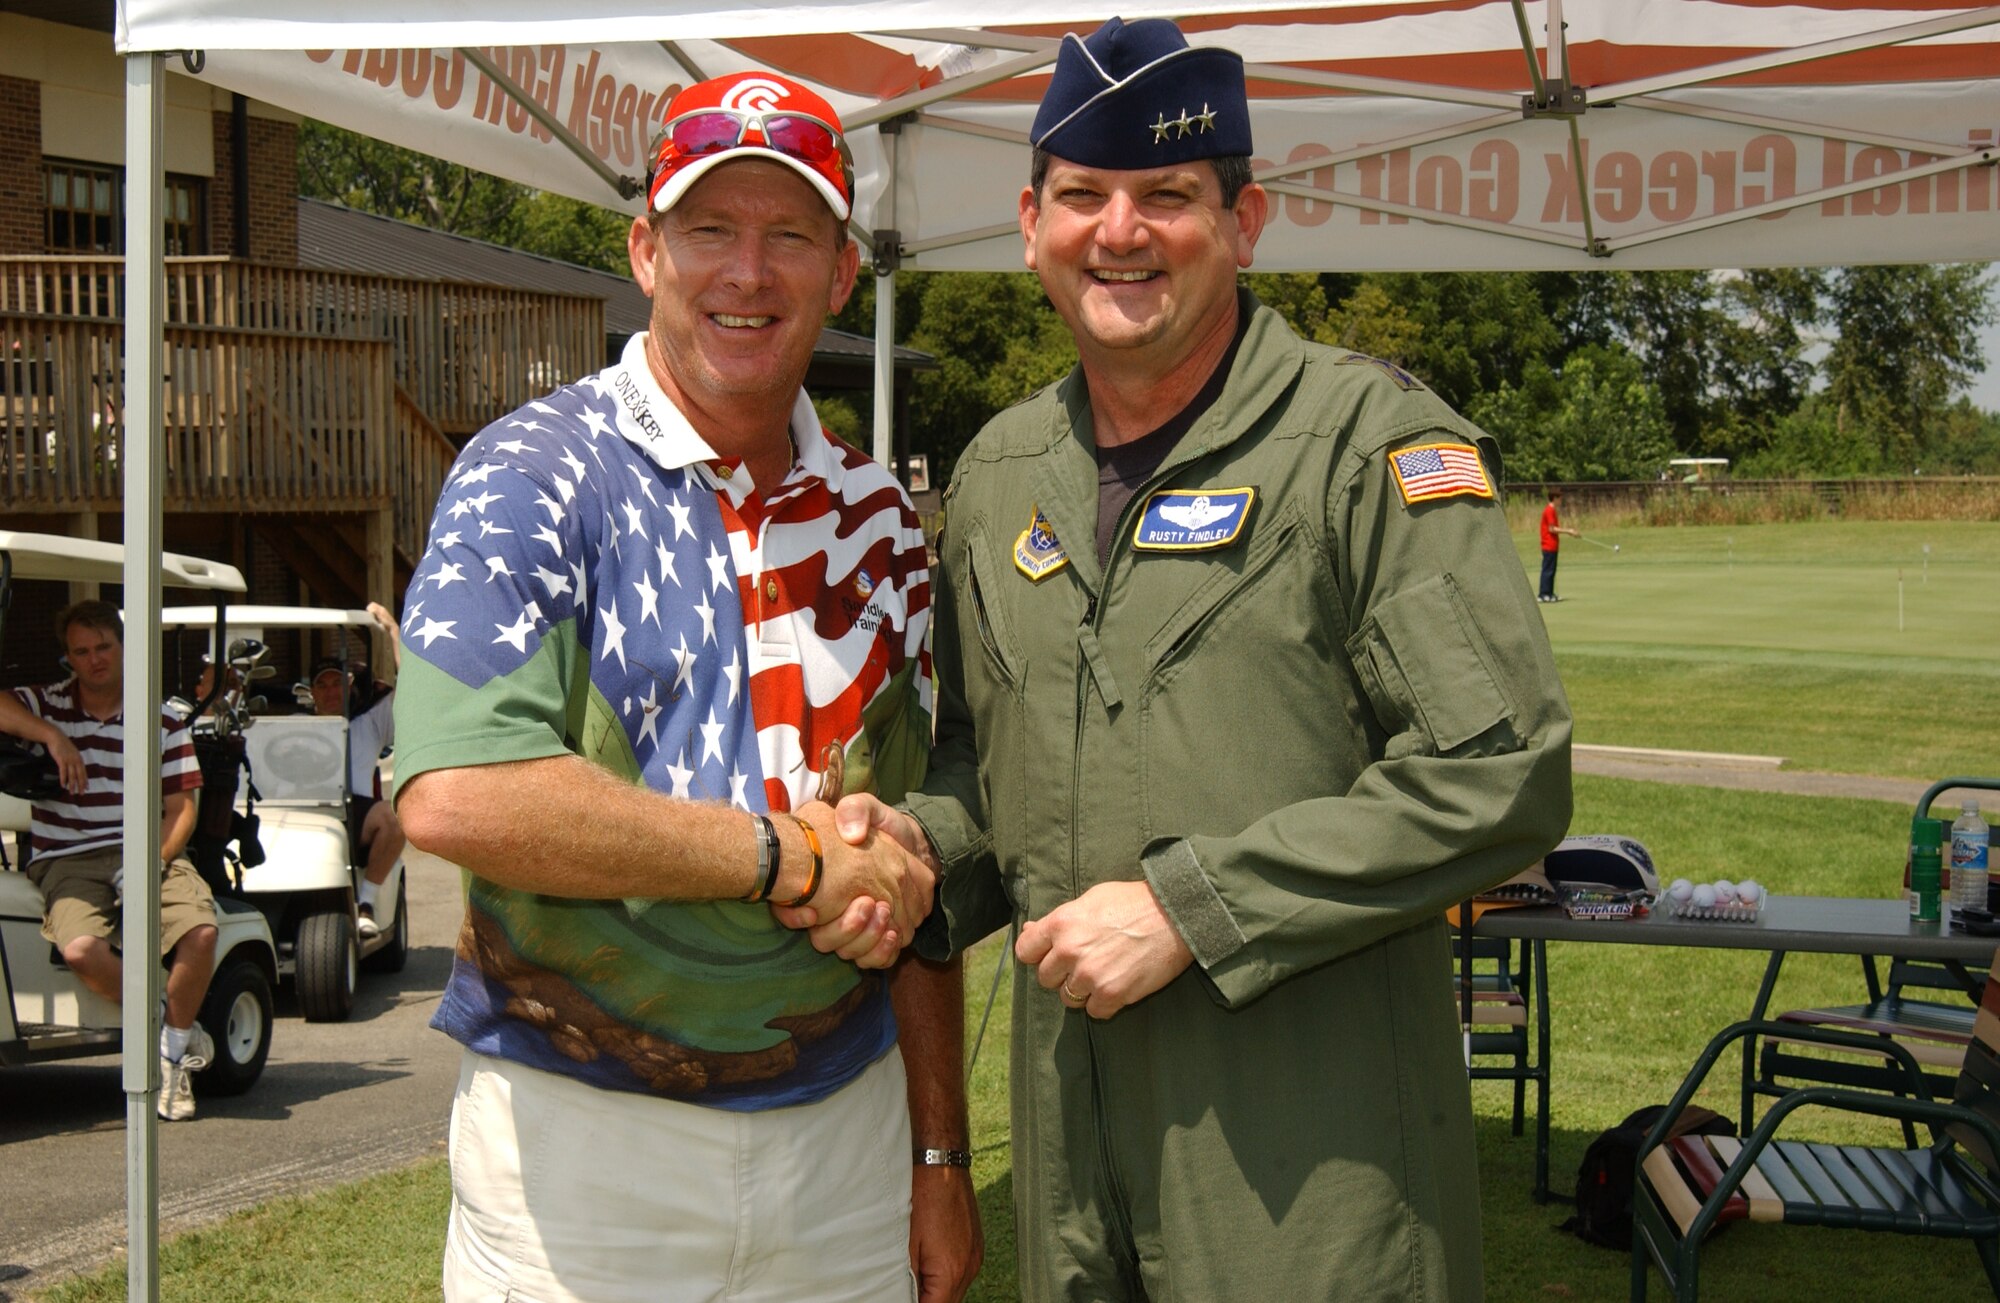 SCOTT AIR FORCE BASE, Ill. -- Lt. Gen. Vern Findley (right), Air Mobility Command vice commander, coins Professional Golfer’s Association tour professional Woody Austin at the 2008 Chief’s Group Golf Tournament. General Findley also received an autographed hat and golf ball from Mr. Austin.
(US Air Force photo/Airman 1st Class Amber Kelly-Woodward)
